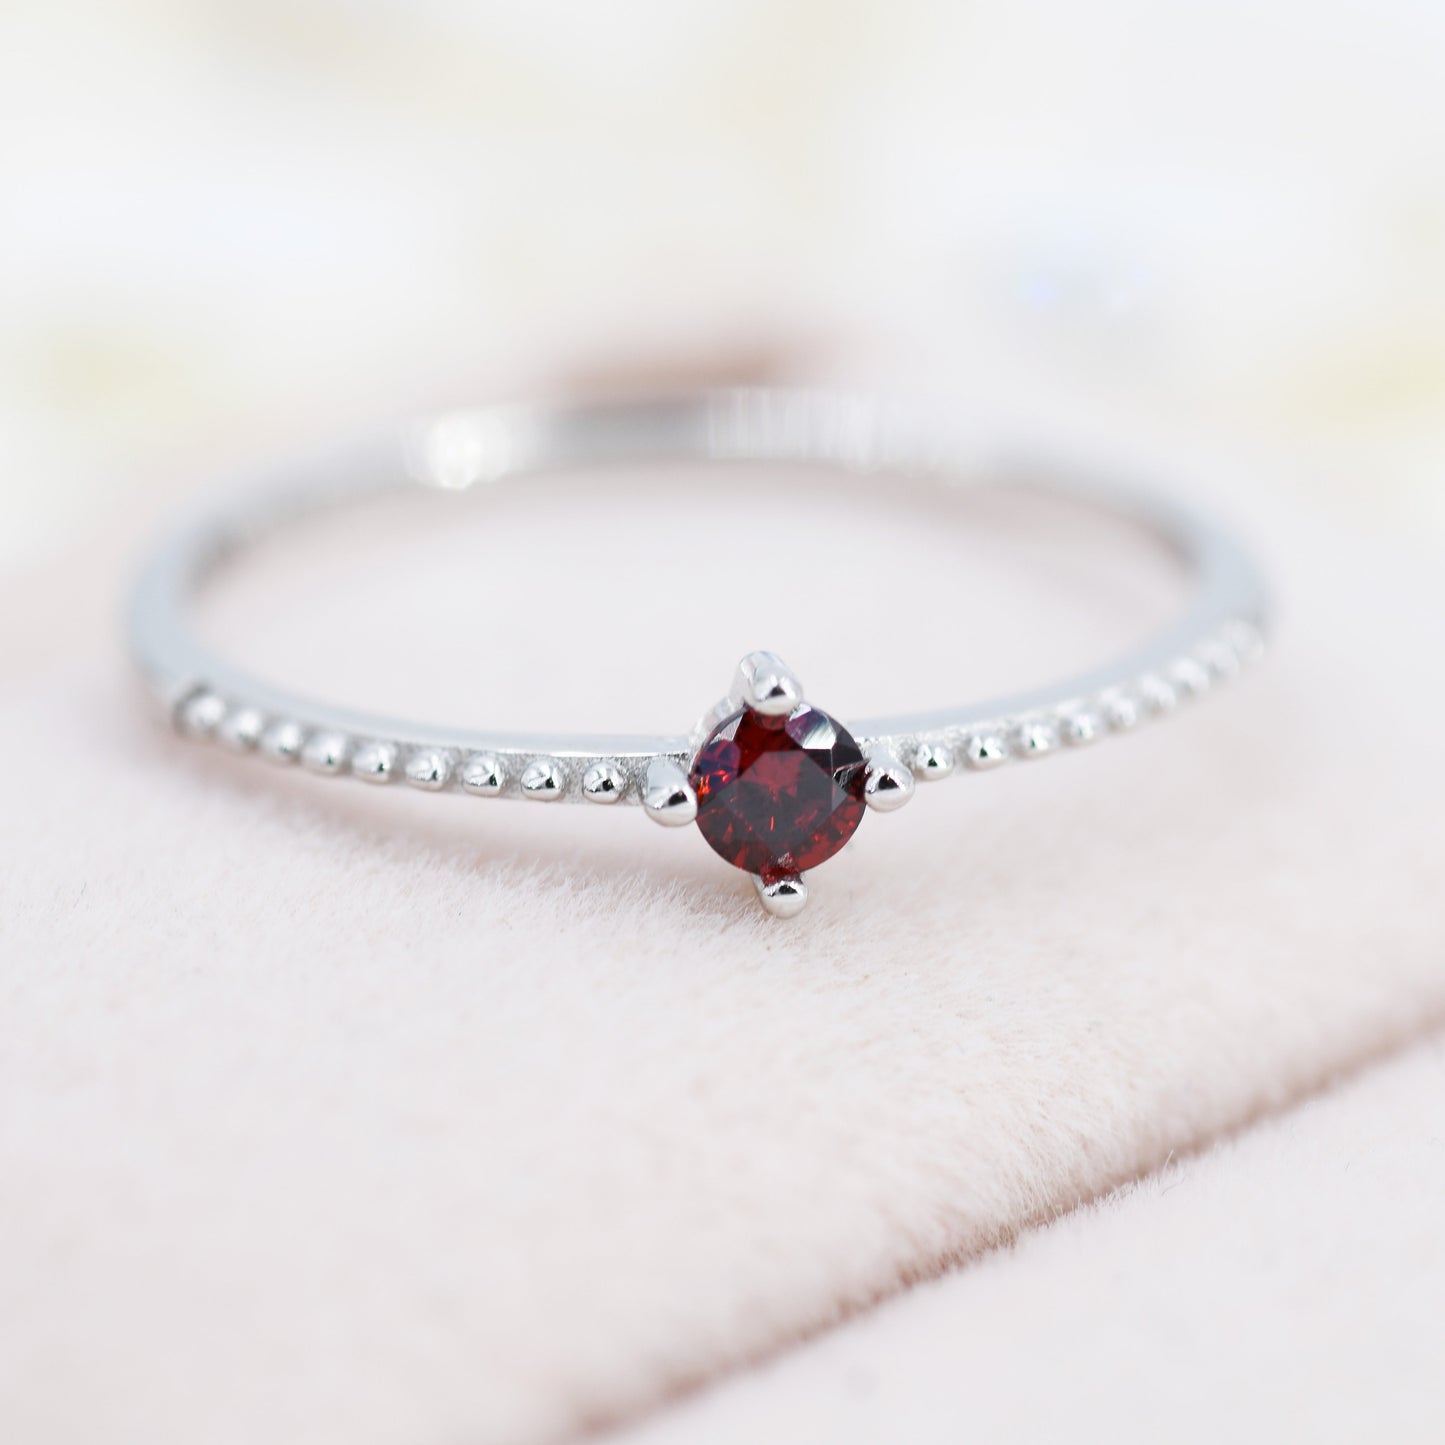 Garnet Red CZ Ring in Sterling Silver, Silver or Gold, Delicate Stacking Ring, Nesting Band, Size US 6 - 8, January Birthstone